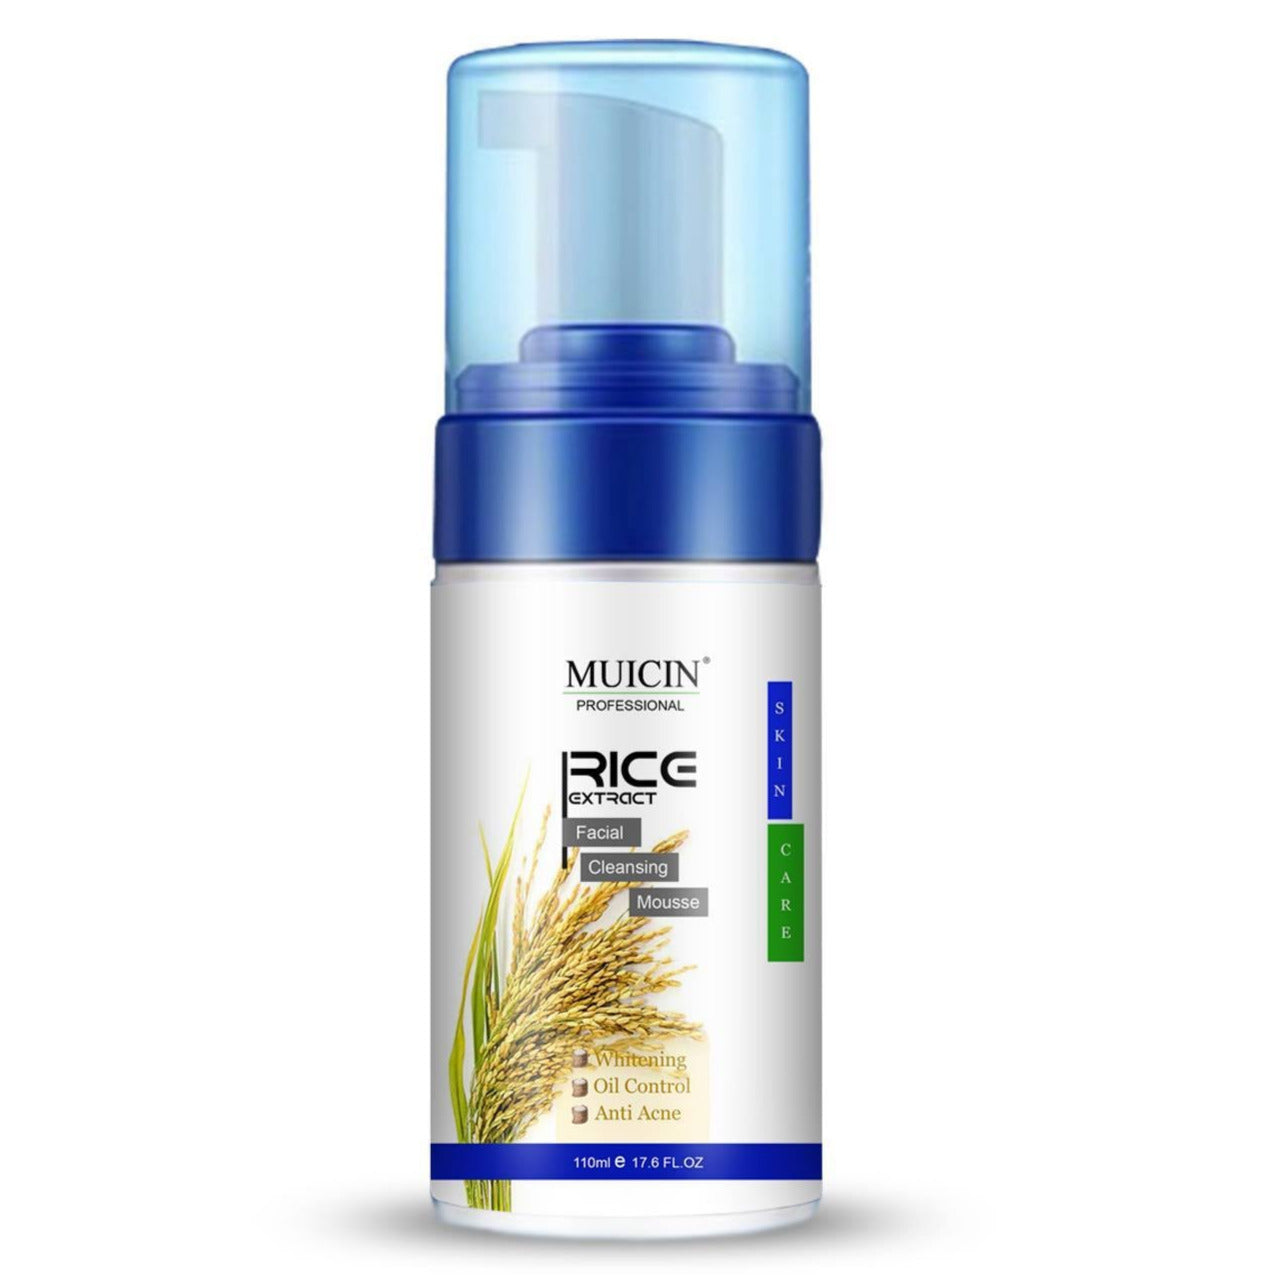 Buy  MUICIN - Rice Extract Facial Cleansing Mousse - 110ml - at Best Price Online in Pakistan